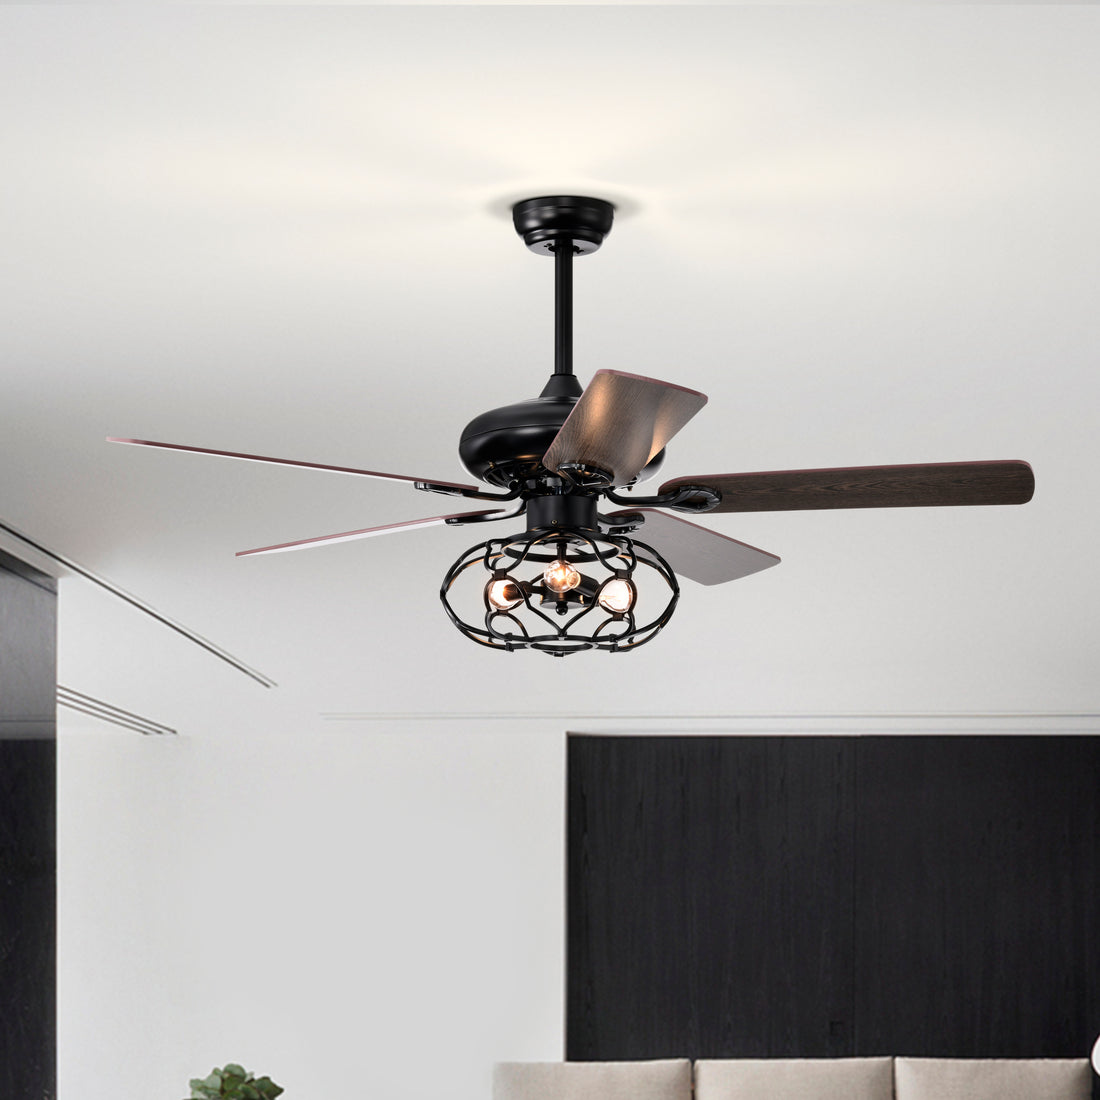 Low Profile Ceiling Fan with Lights no include